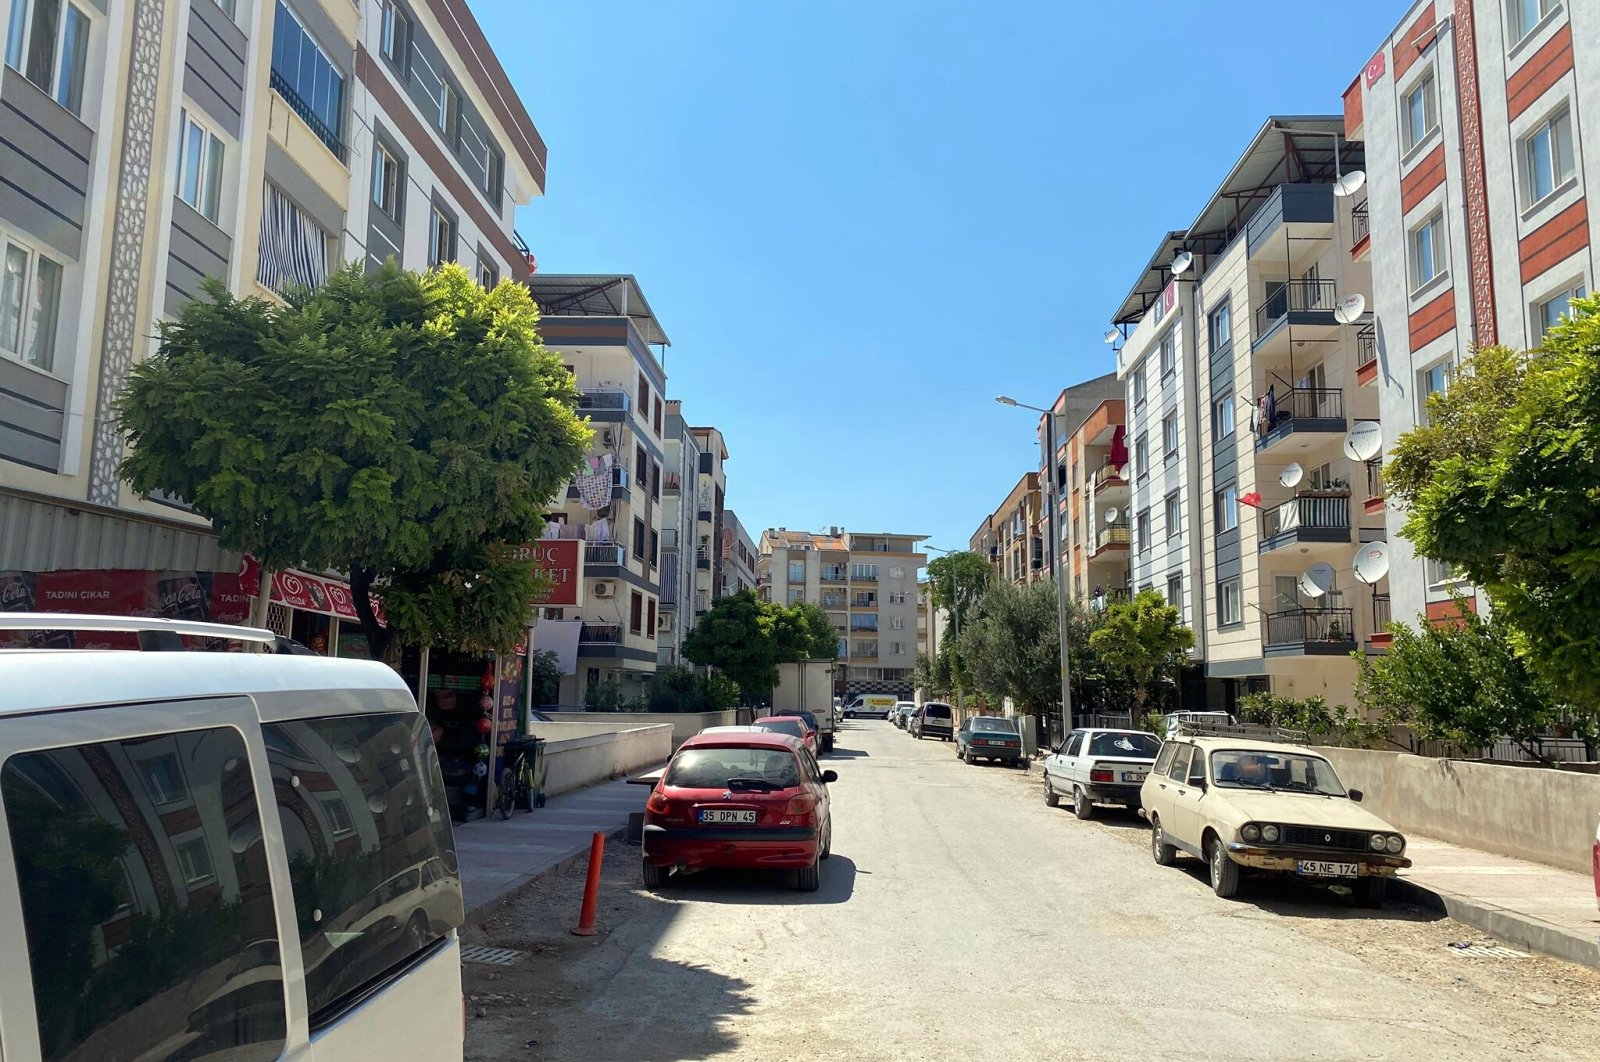 View of a street in Soma, Manisa, western Turkey, July 17, 2022. (DHA Photo)